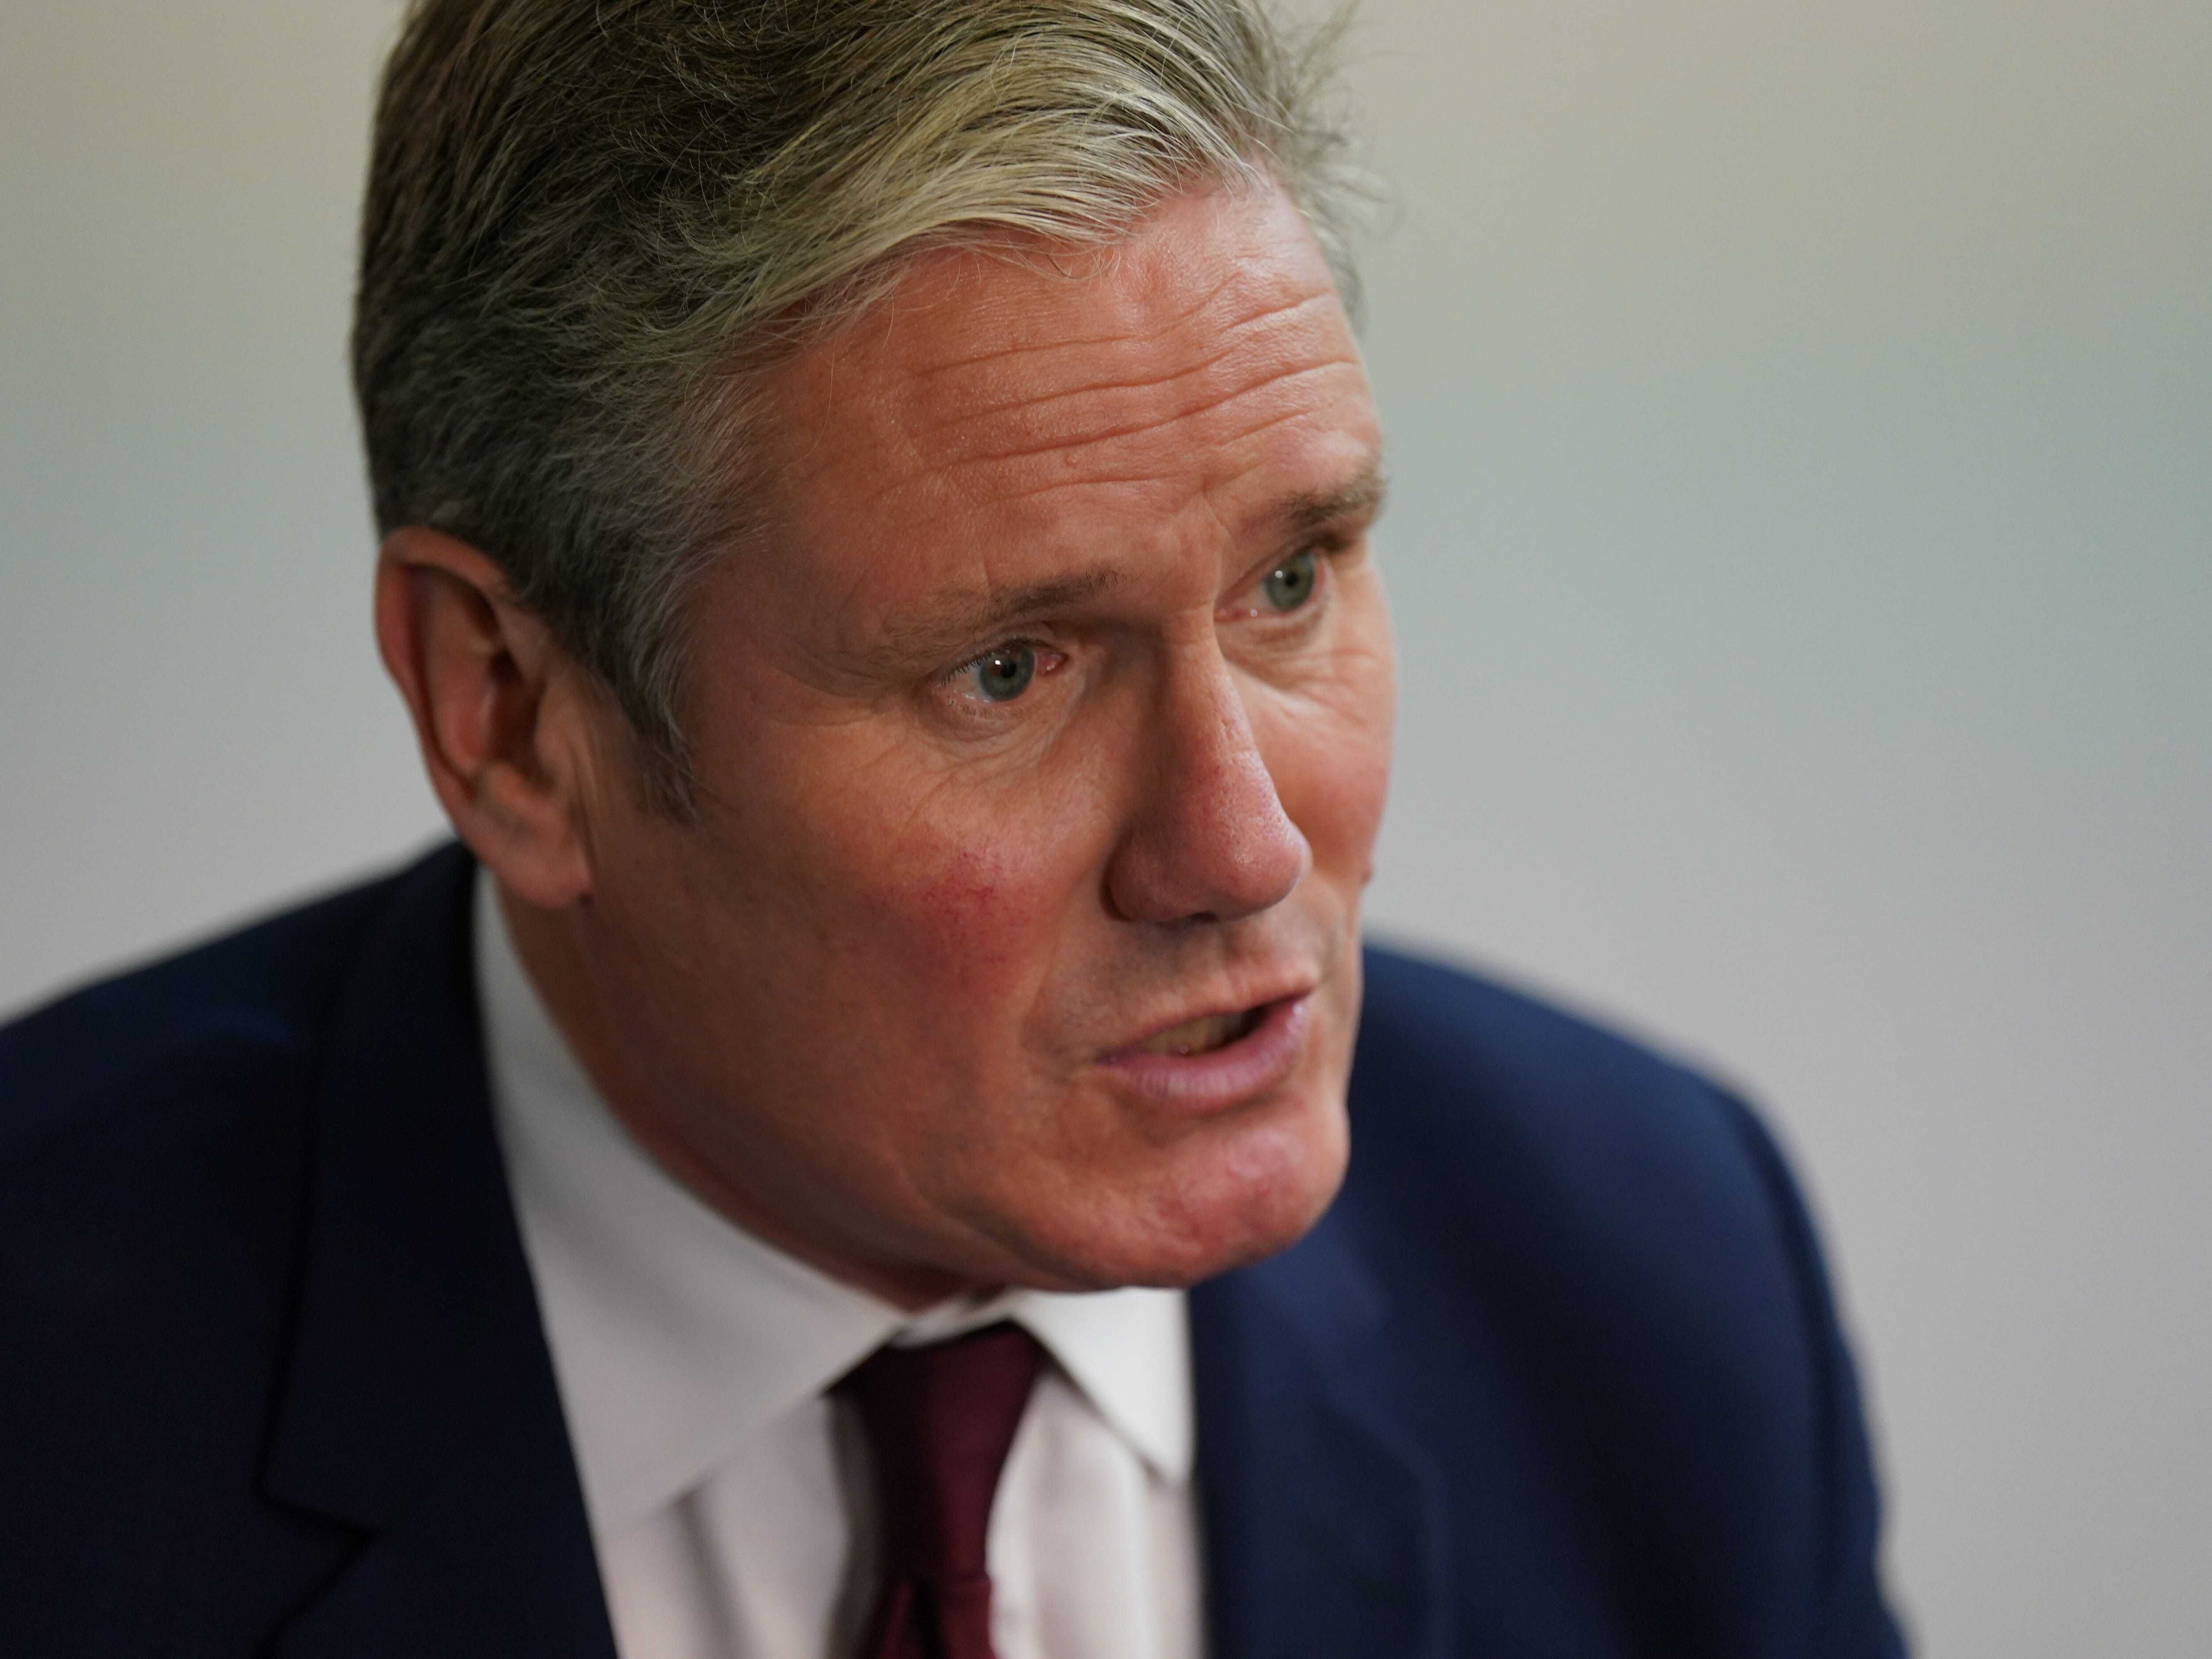 Starmer accuses Tory MPs of prioritising their party over the country